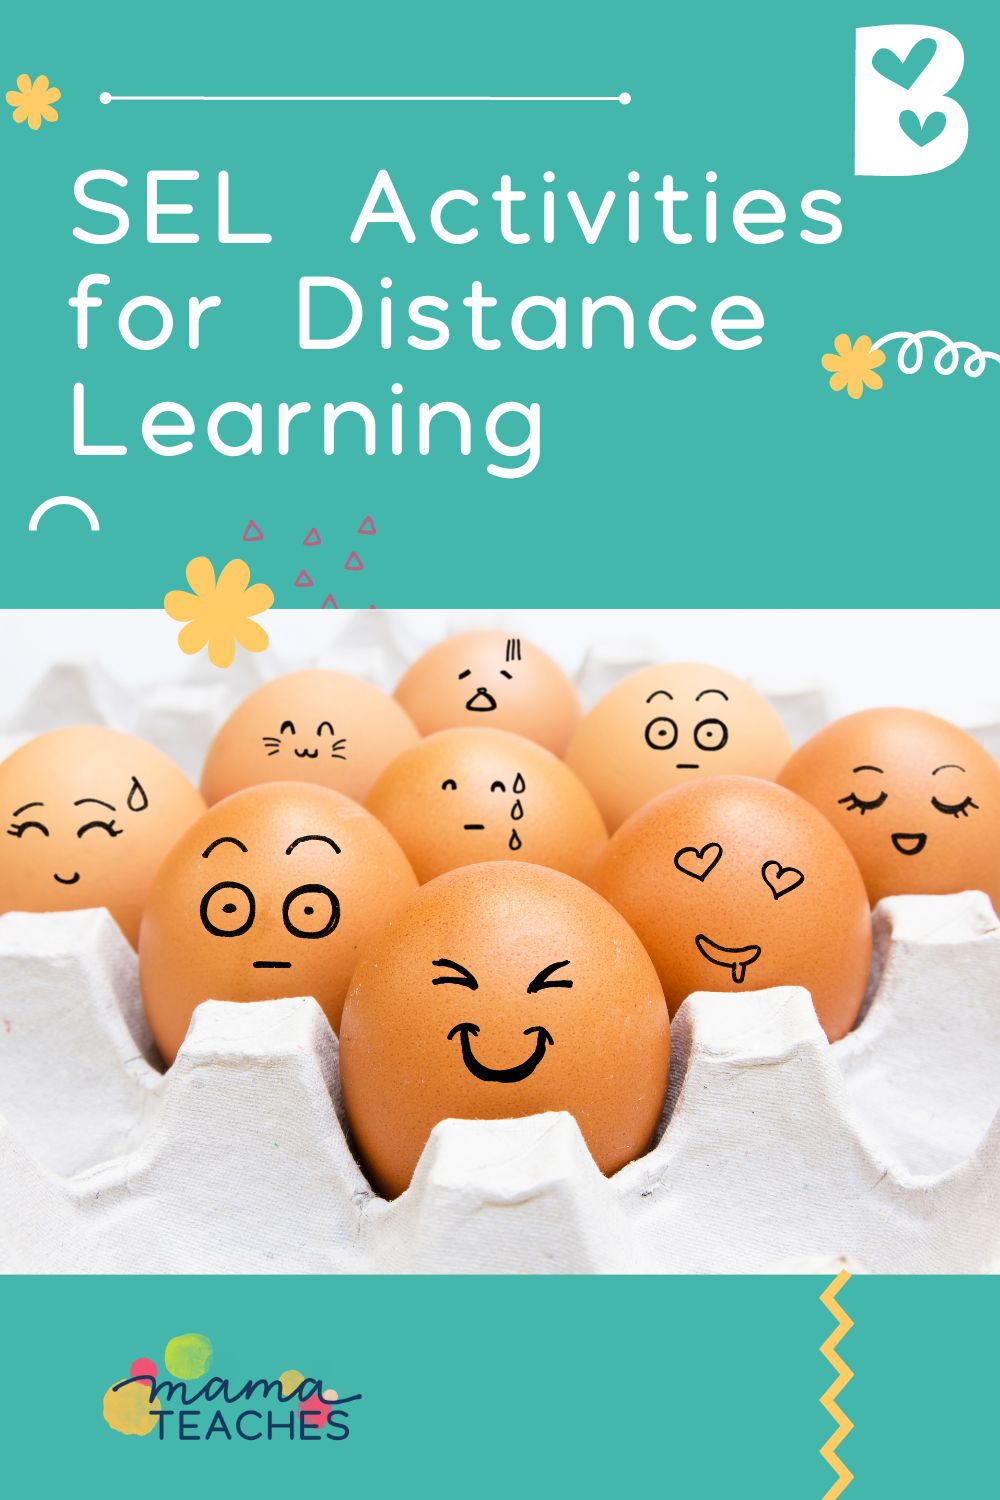 SEL ACTIVITIES FOR DISTANCE LEARNING 